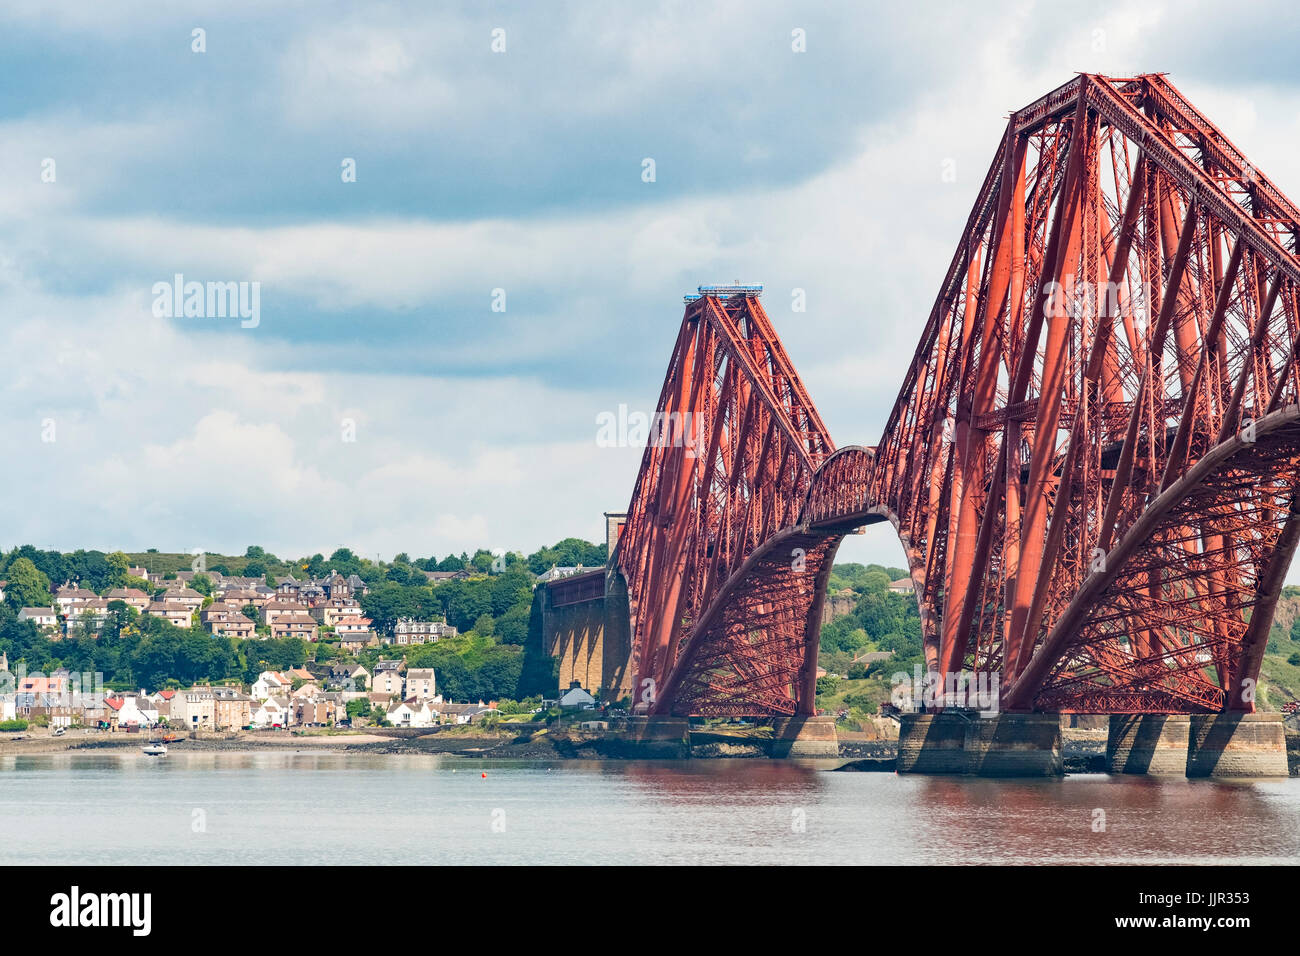 View of historic Forth Railway Bridge and village of North Queensferry from South Queensferry in Scotland, United Kingdom. Stock Photo